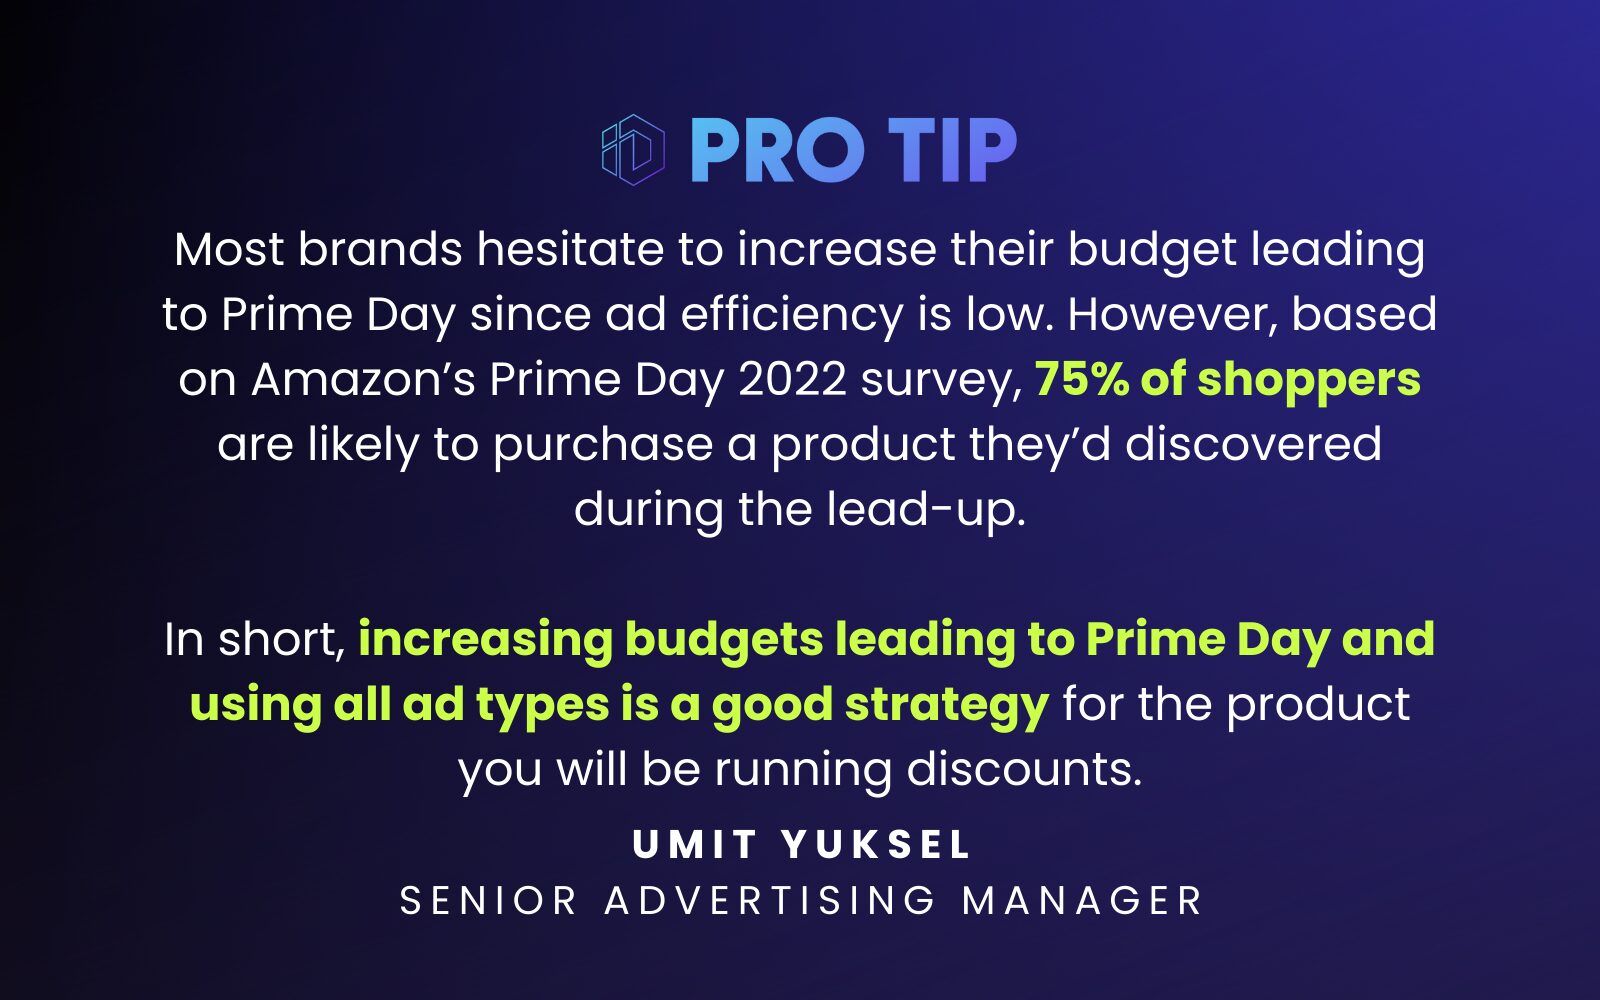 “Most brands hesitate to increase their budget leading to Prime Day since ad efficiency is low. However, based on Amazon’s Prime Day 2022 survey, 75% of shoppers are likely to purchase a product they’d discovered during the lead-up. In short, increasing budgets leading to Prime Day and using all ad types is a good strategy for the product you will be running discounts.” Umit Yuksel Senior Advertising Manager 